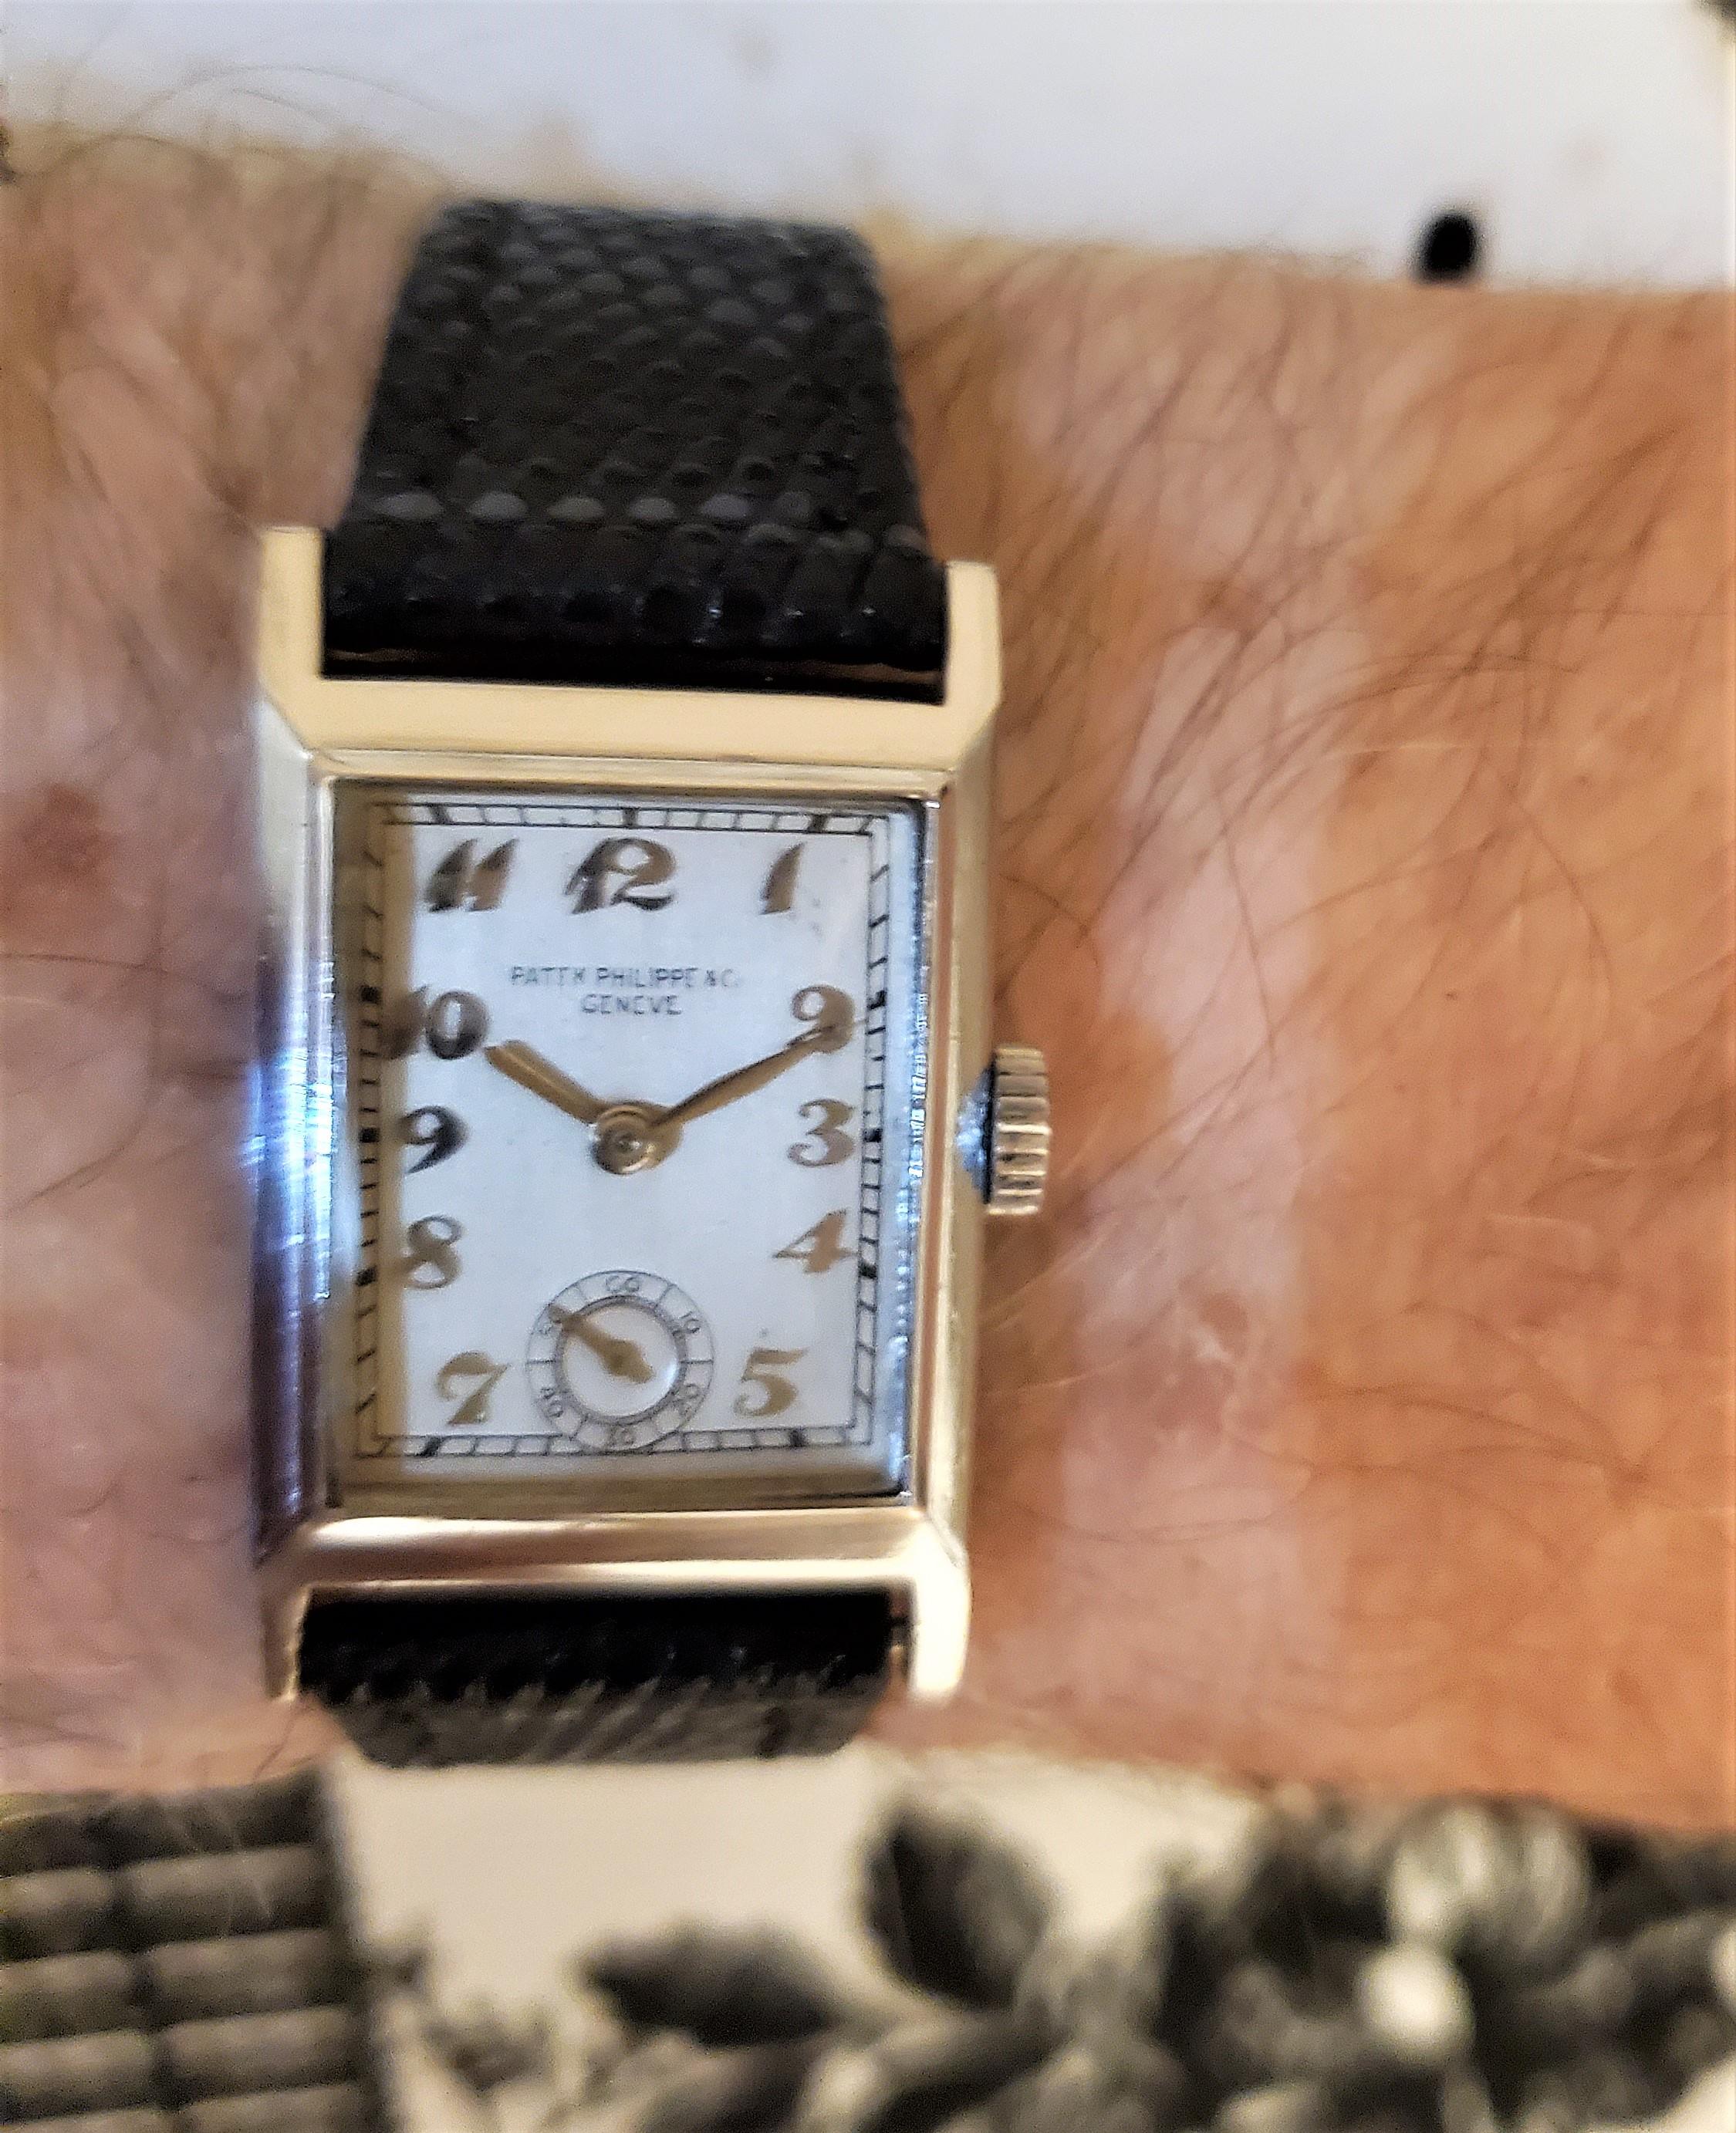 Patek Philippe Platinum Art Deco watch, measuring 22.5 x 37mm.  The watch was made between 1934-1935 and is fitted with an manual winding 9